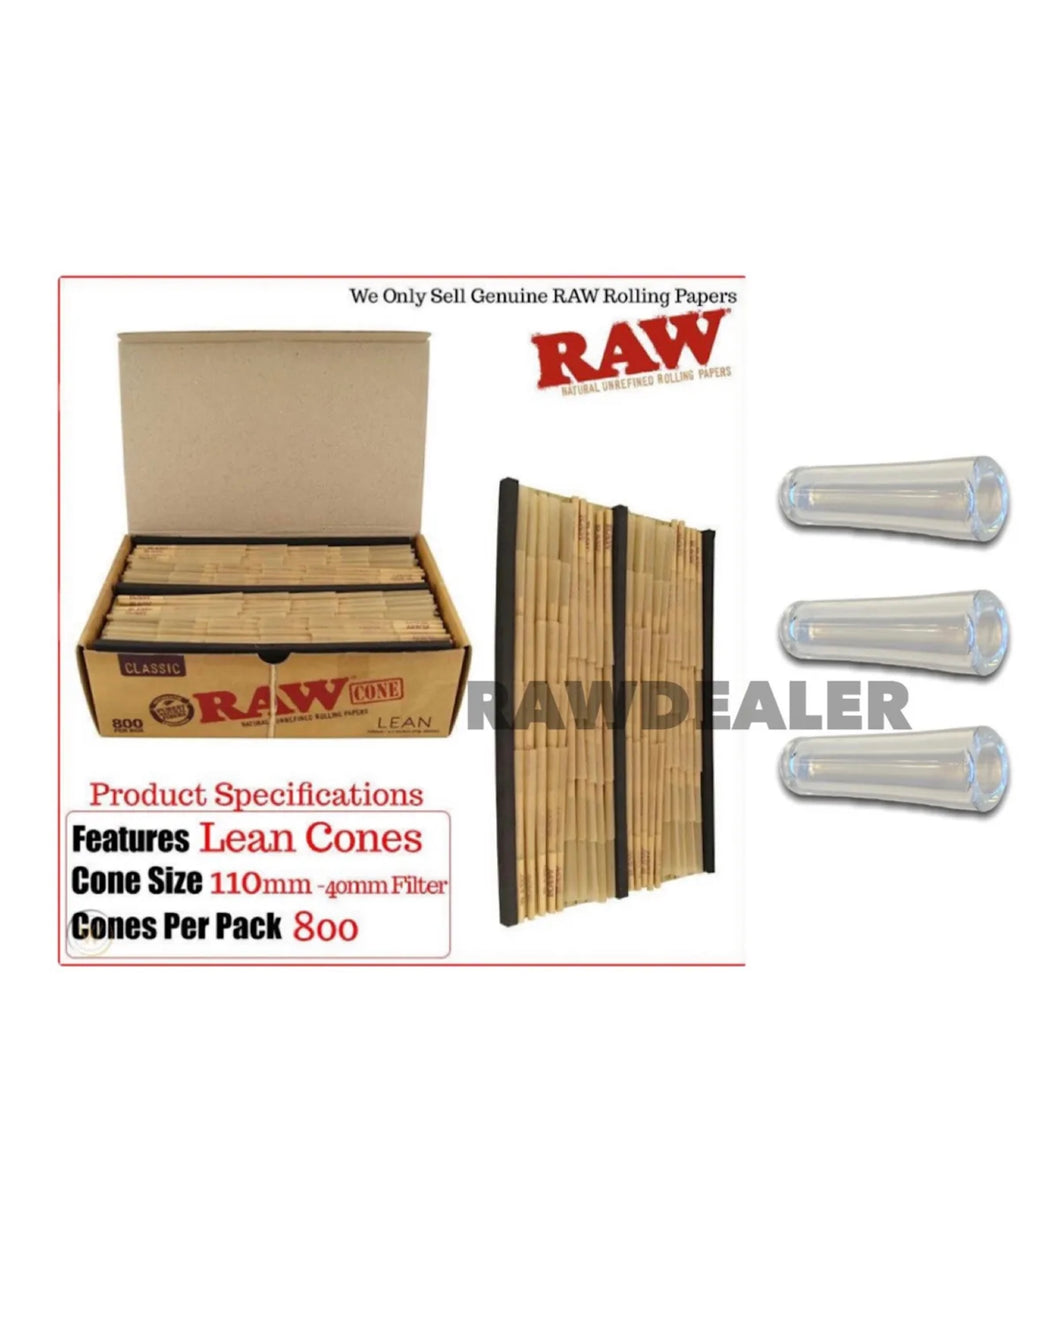 raw classic LEAN size cone W tip FULL BOX ( 800 pack)+ 3 GLASS cone holder tip